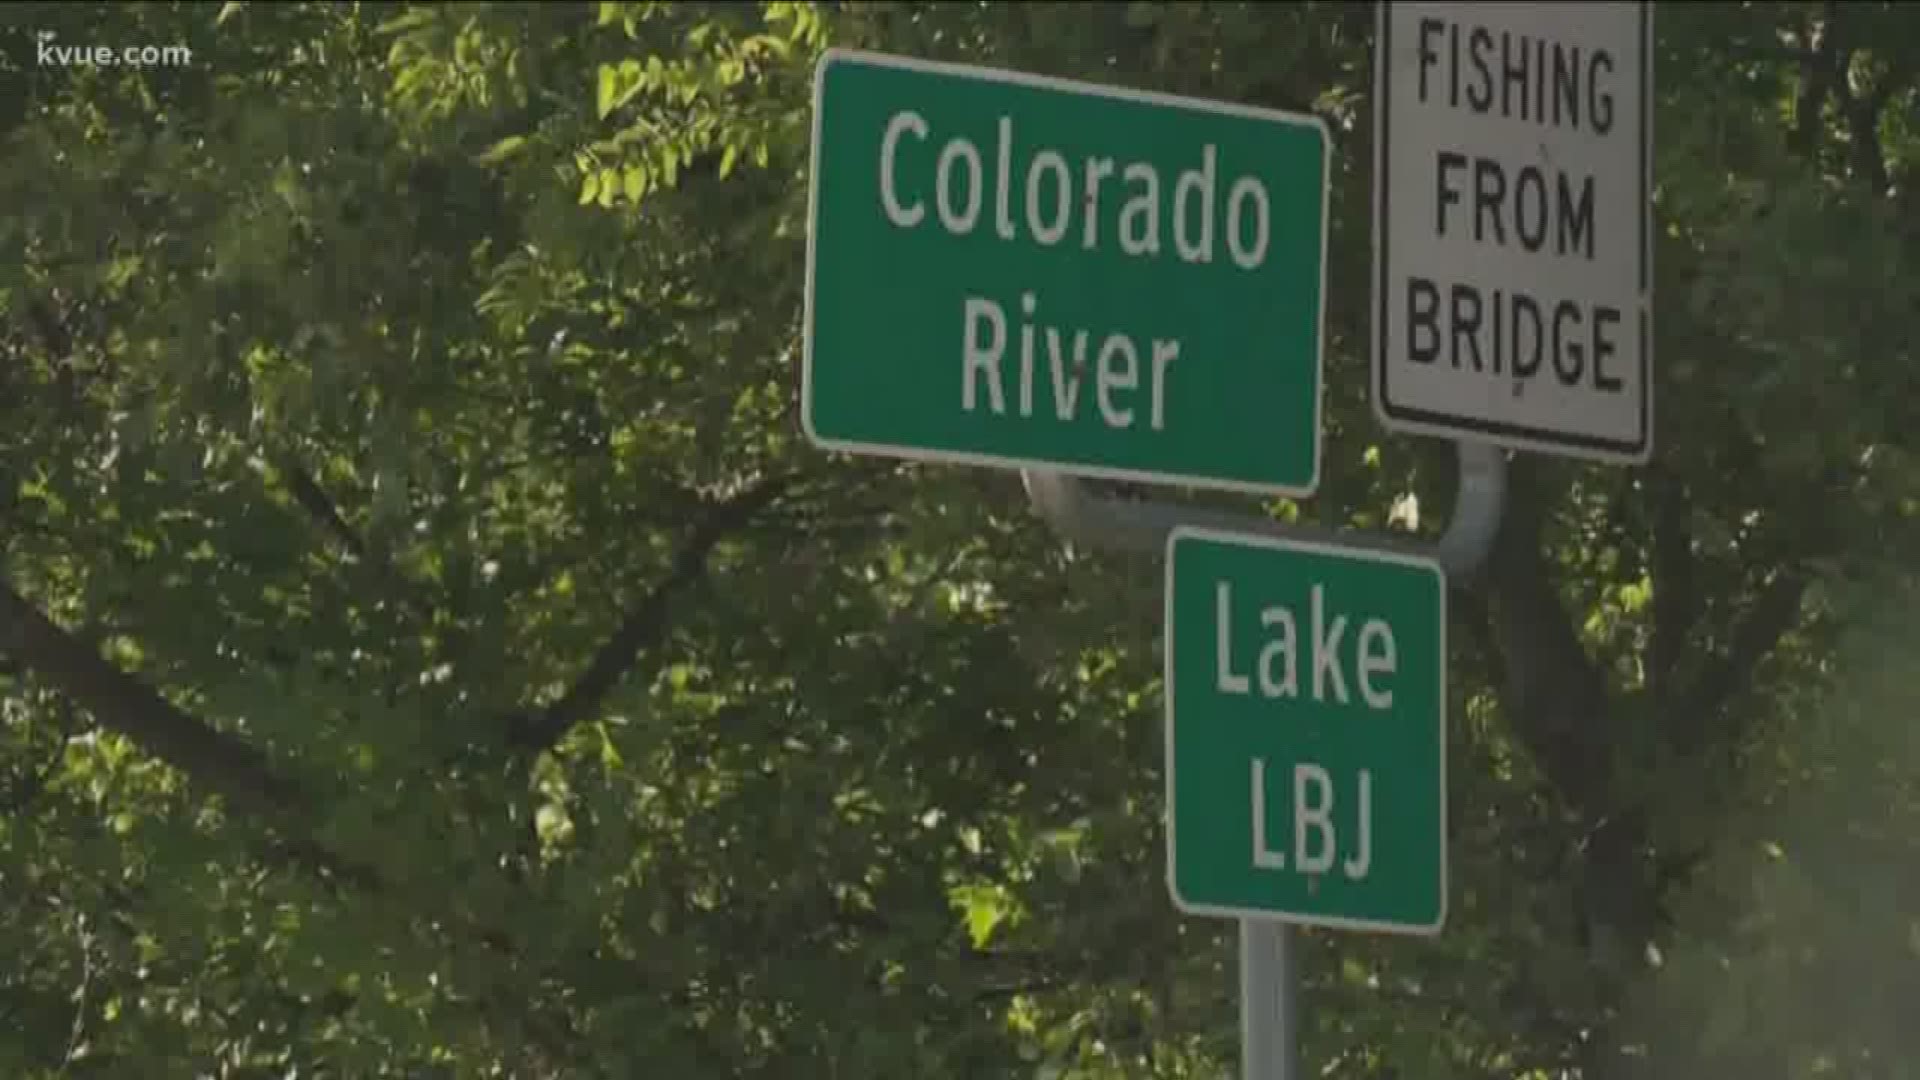 The search for a missing boater on the Colorado arm of Lake LBJ ended Sunday with his body being found.